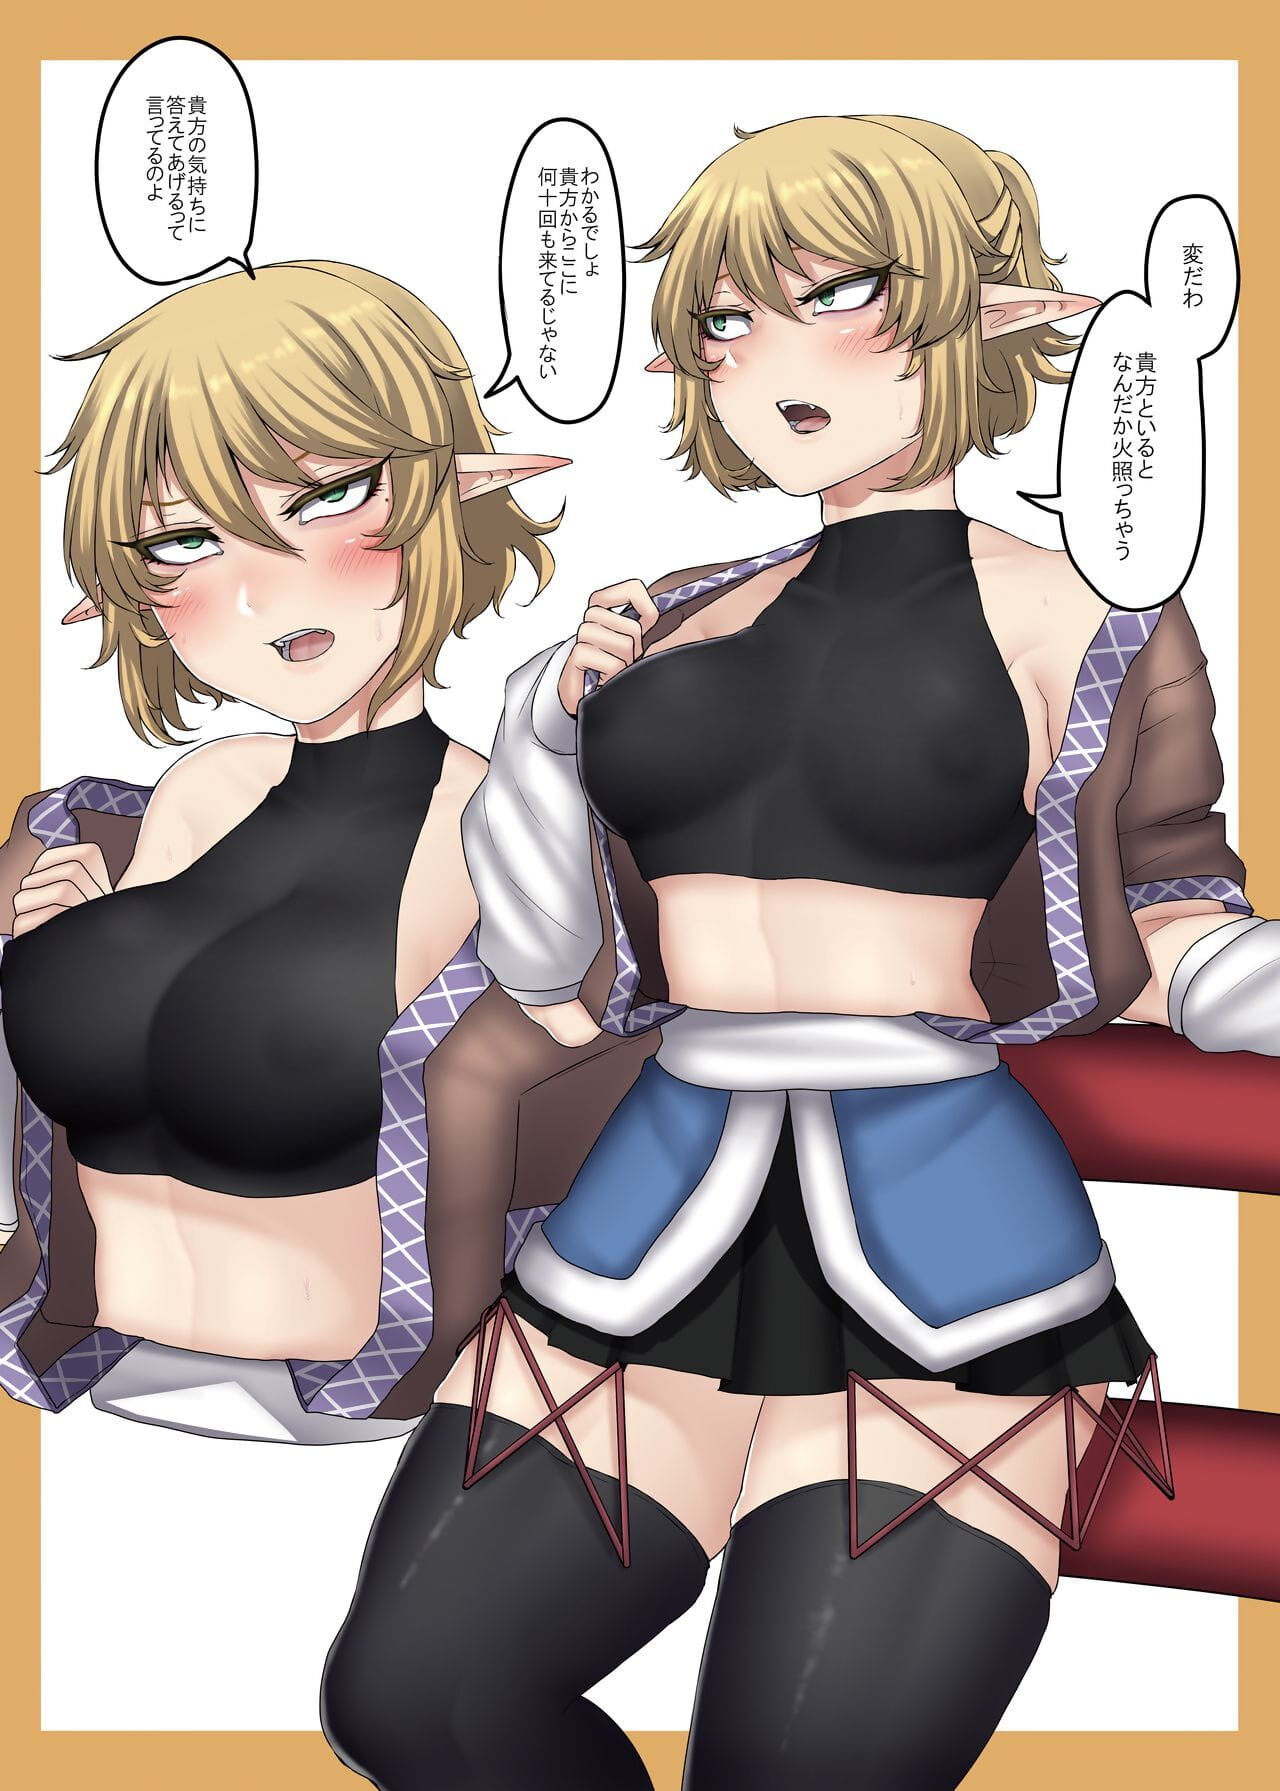 parsee お盆 page 1